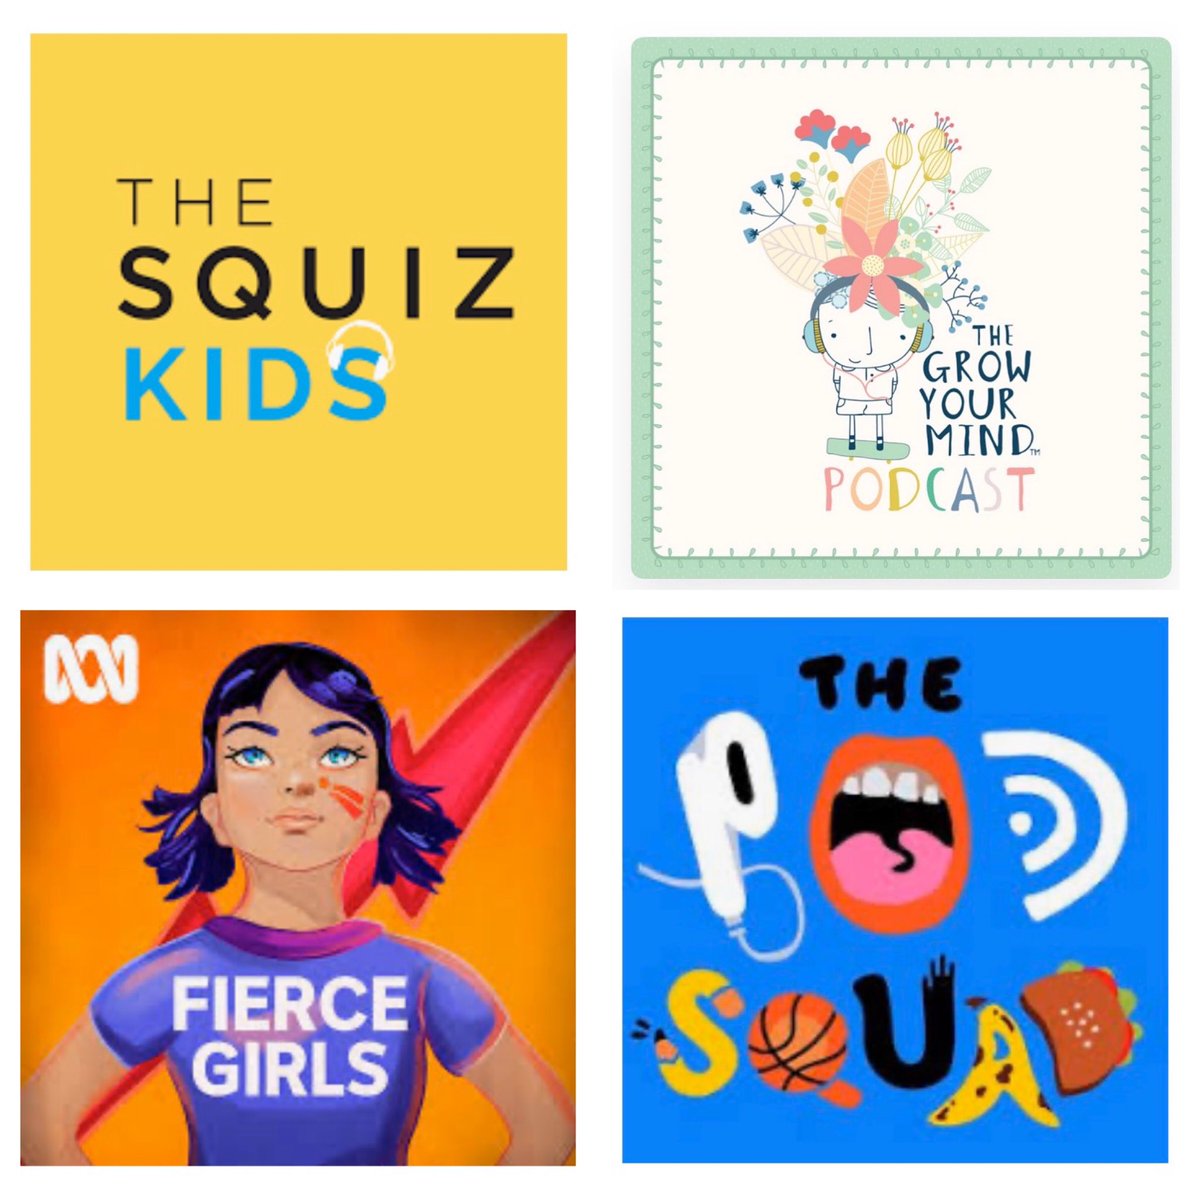 Happen to be home with school aged kids?! Here is our take on 4 of the best podcasts for kids with a shameless plug for our Grow Your Mind podcast! The Year 5 & 6 kids on it are BRILLIANT #podcastsforkids #growyourmind #positiveeducation #fiercegirls #podsquad #aussieED